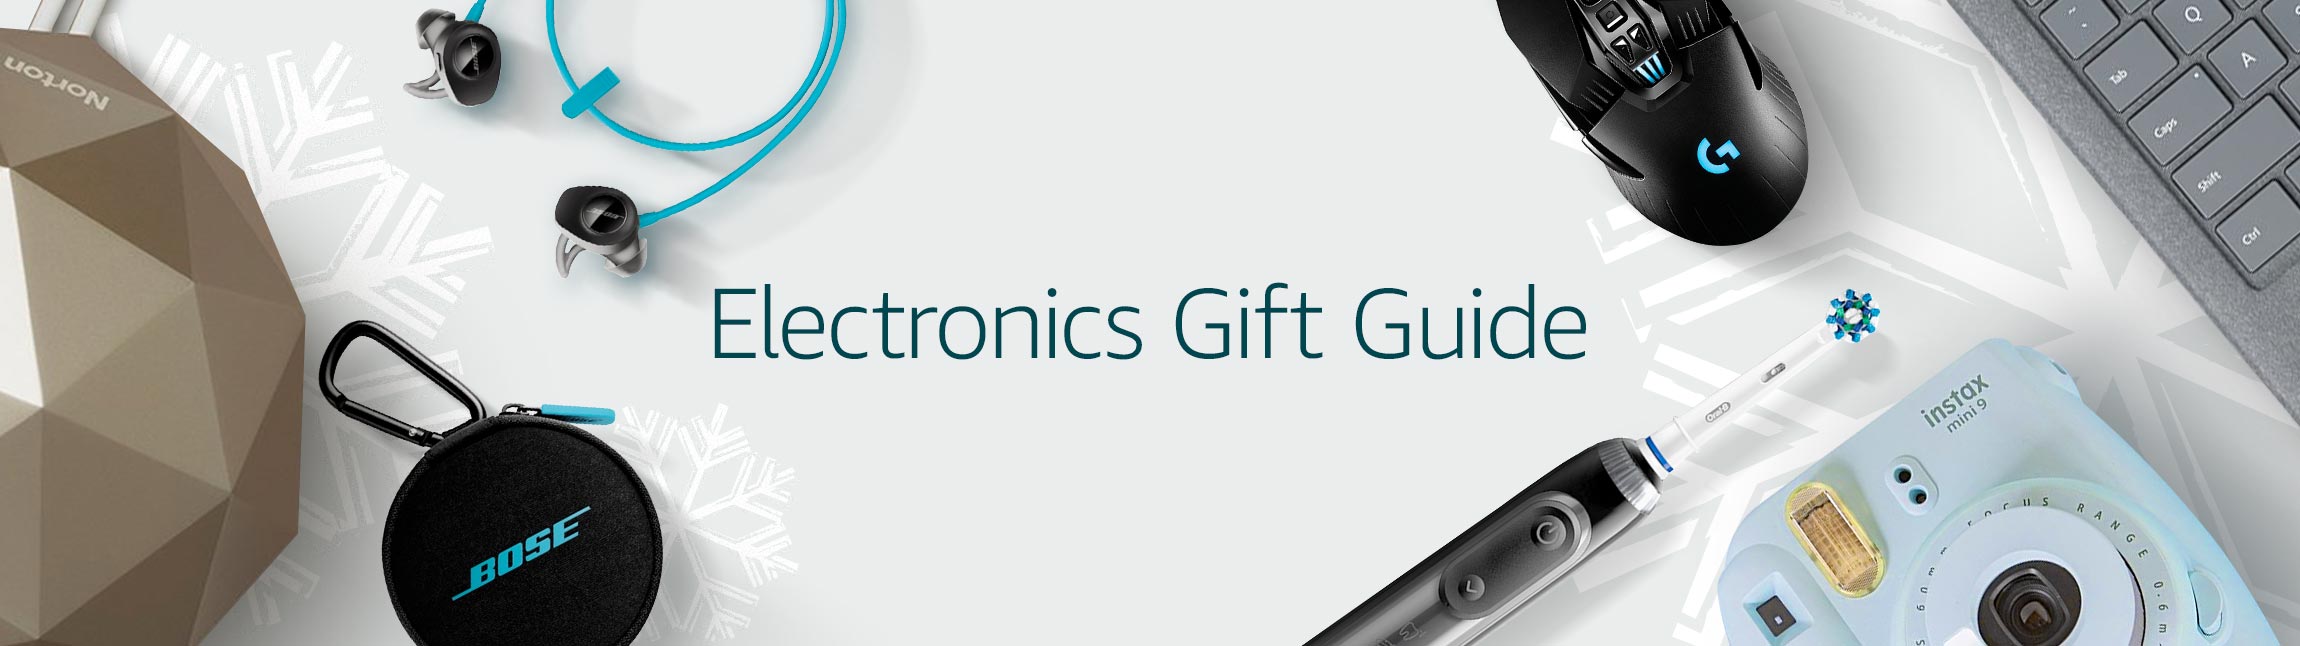 cyber monday electronics gift guide